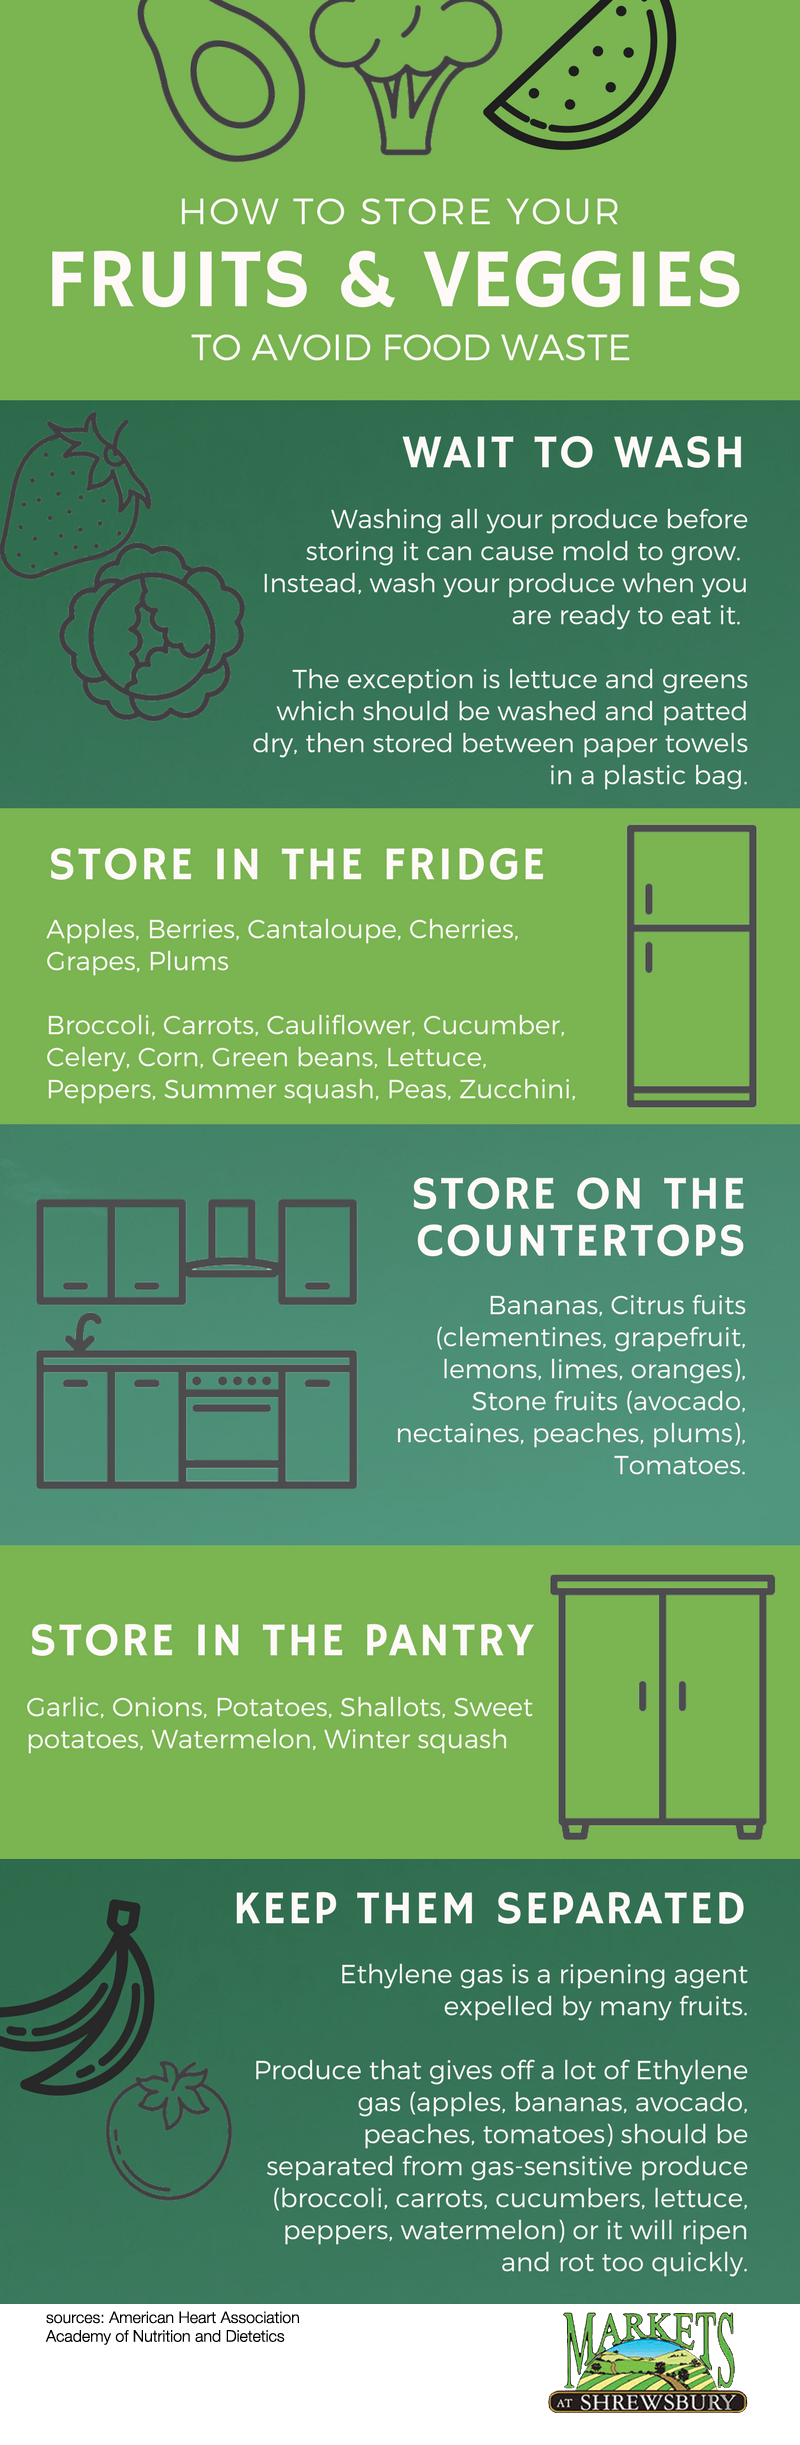 infographic with tips on how to store produce properly